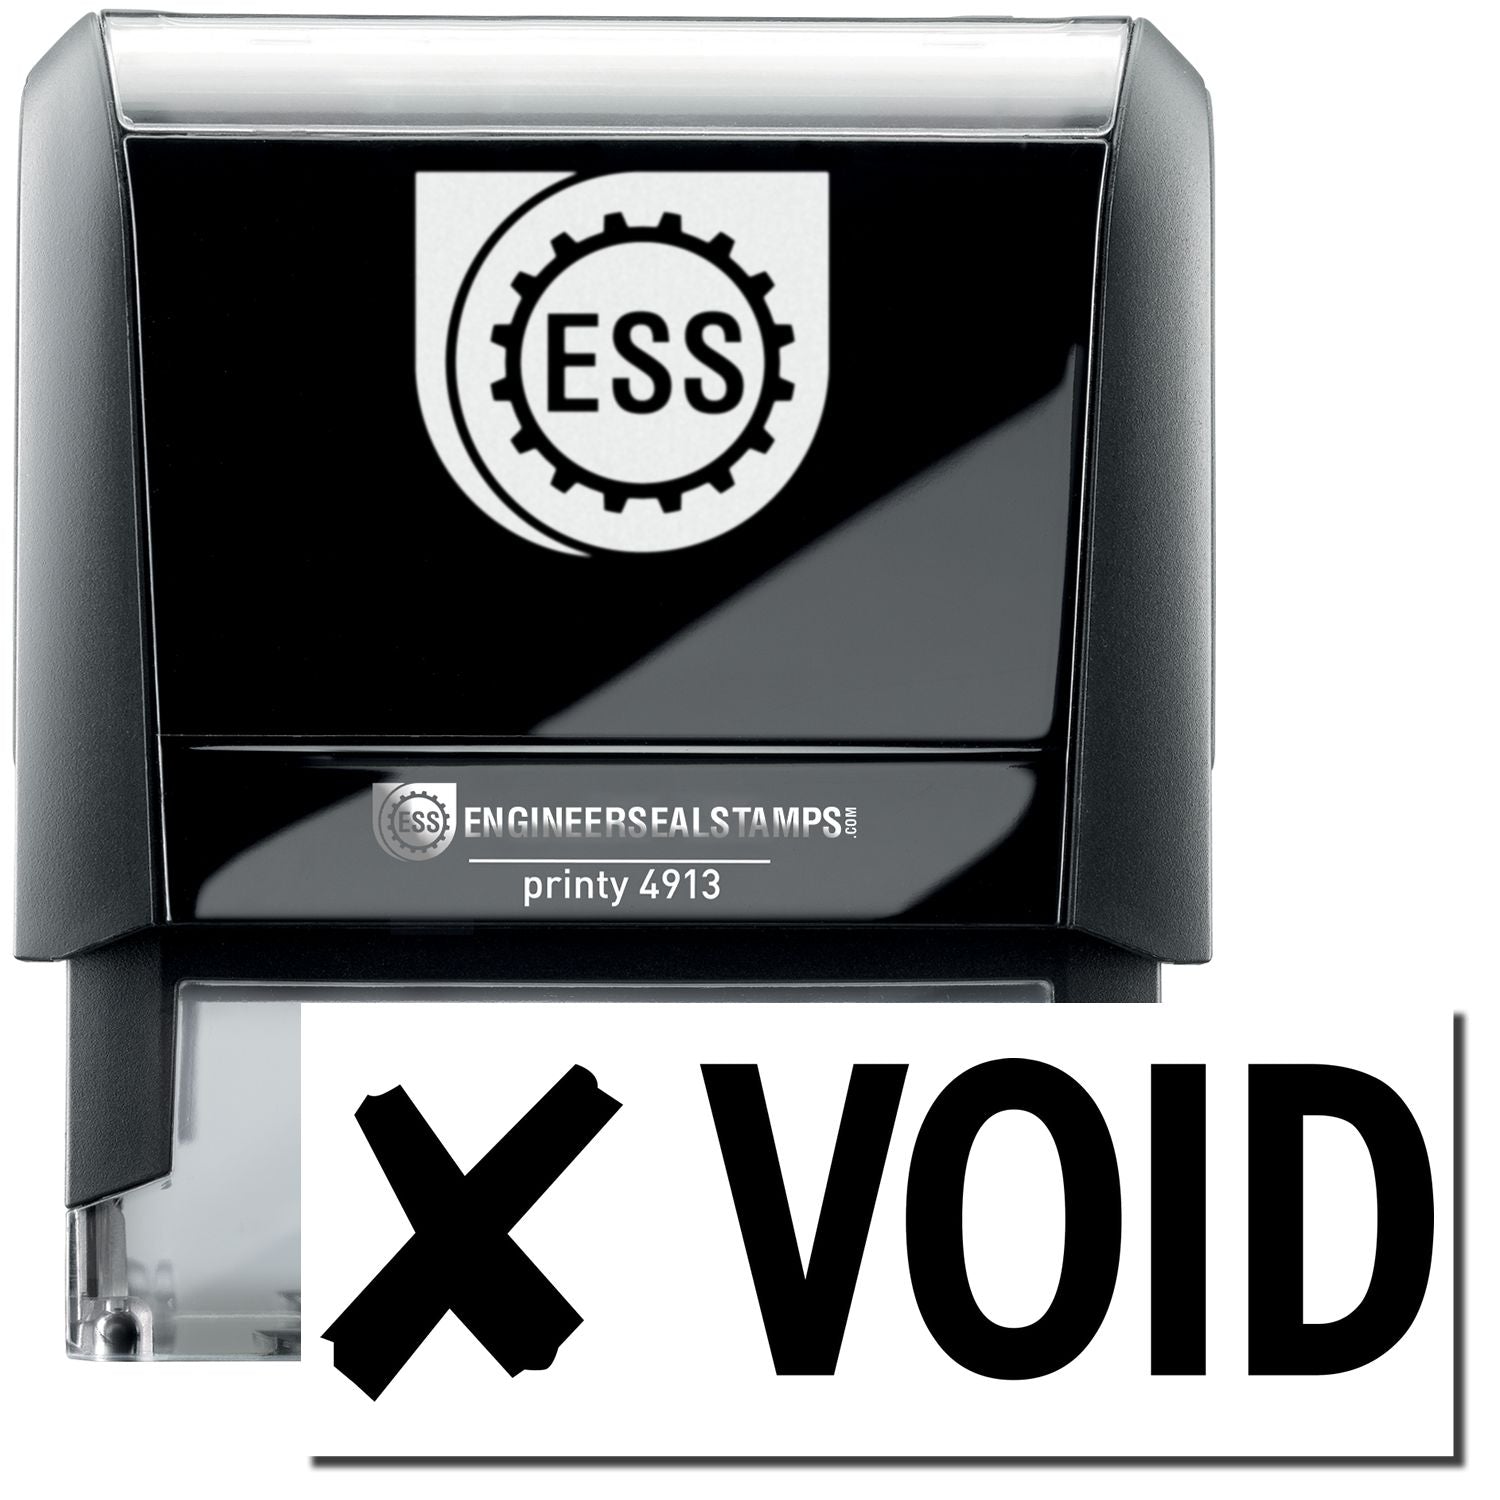 A self-inking stamp with a stamped image showing how the text "VOID" in a large font with an image of a cross (X) on the left side is displayed after stamping.